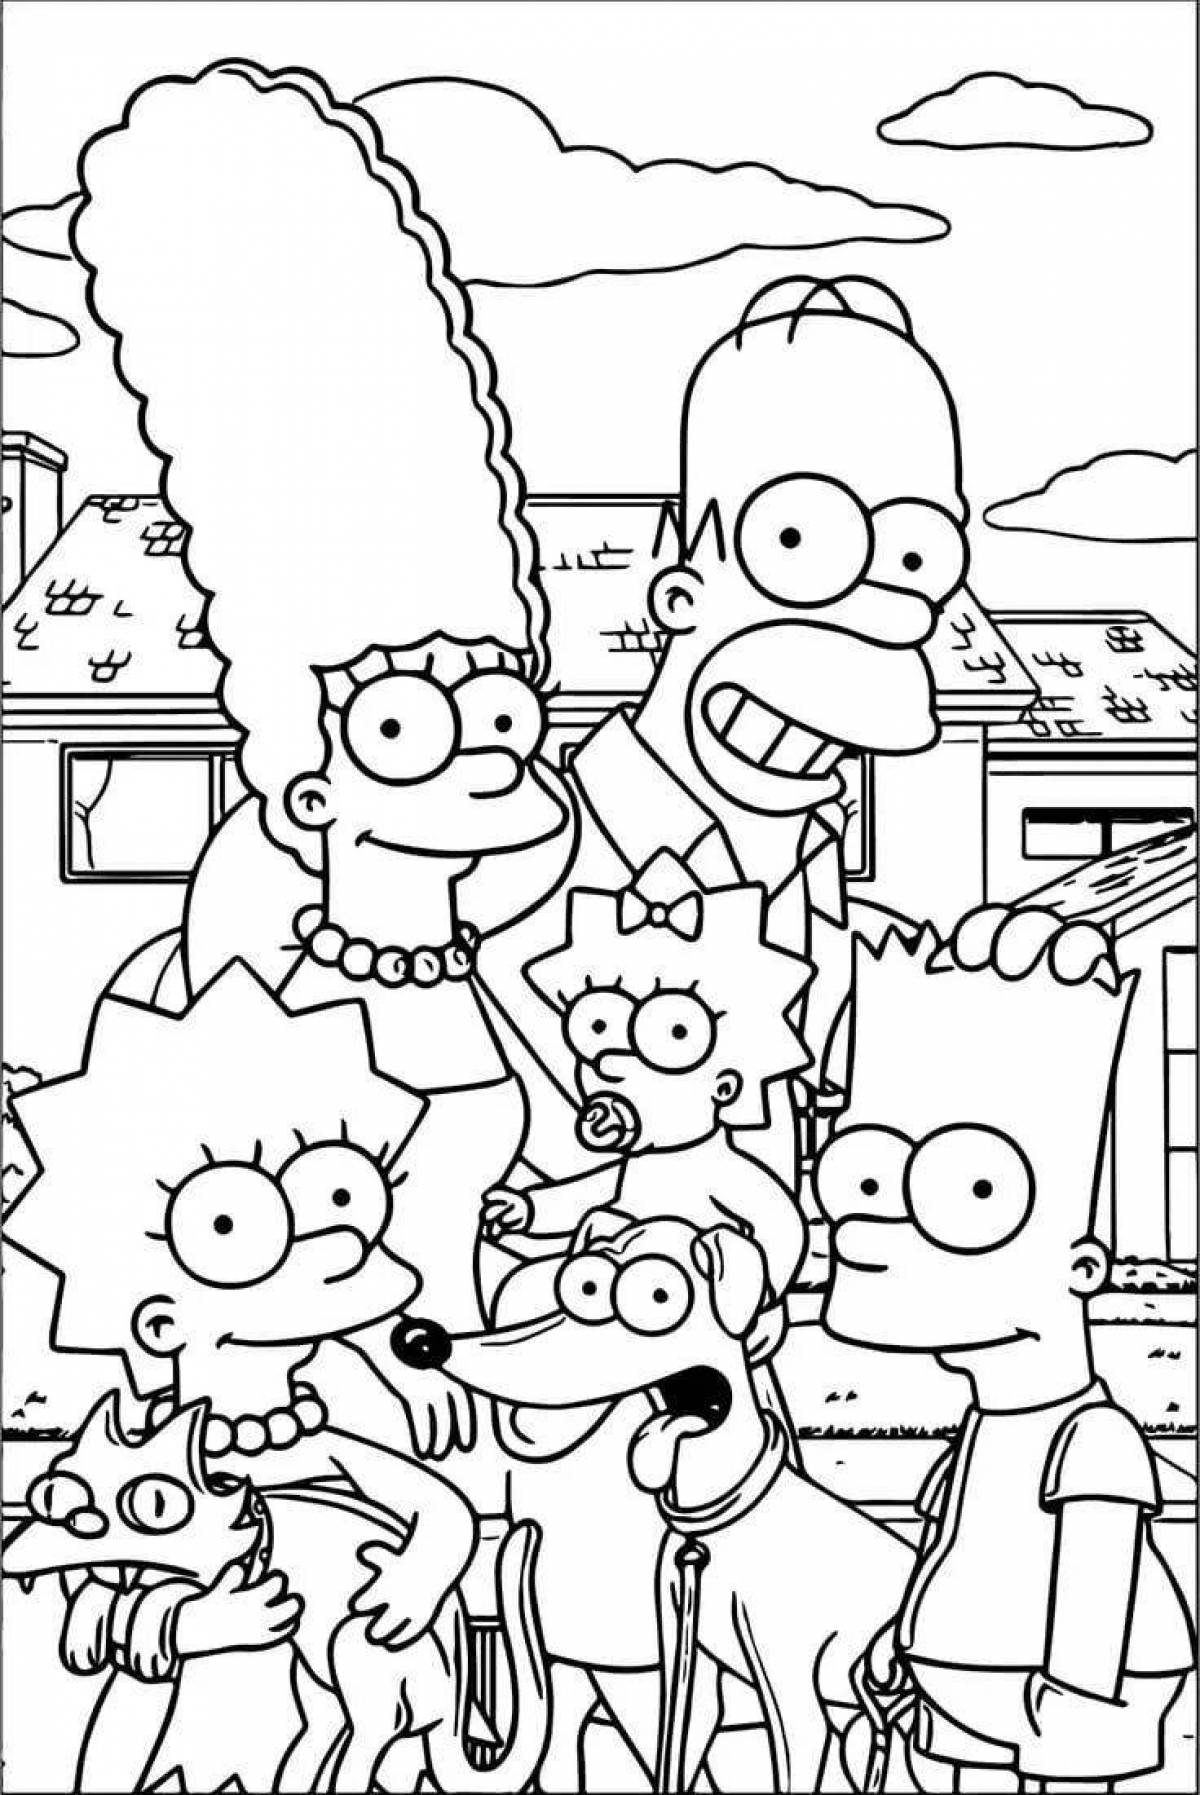 Impressive simpsons coloring by number